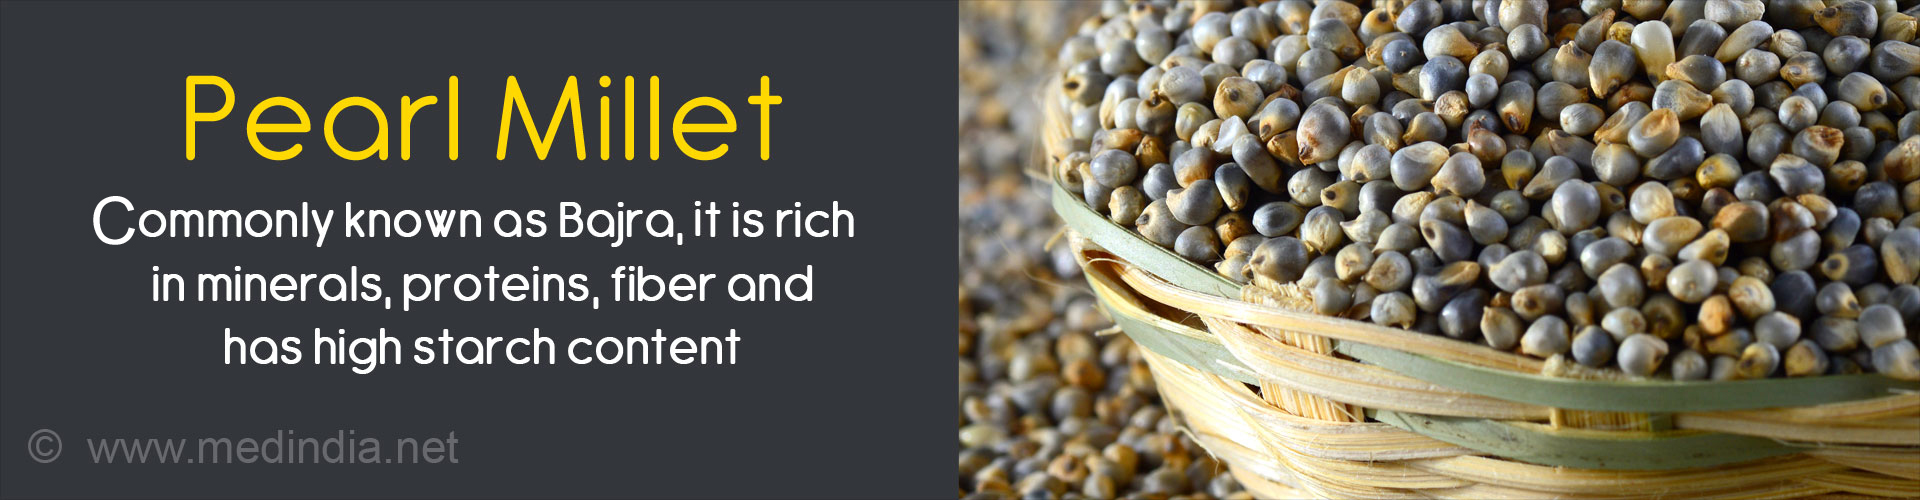 Pearl millet commonly known as bajra. it is rich in minerals, proteins, fiber and has high starch content
